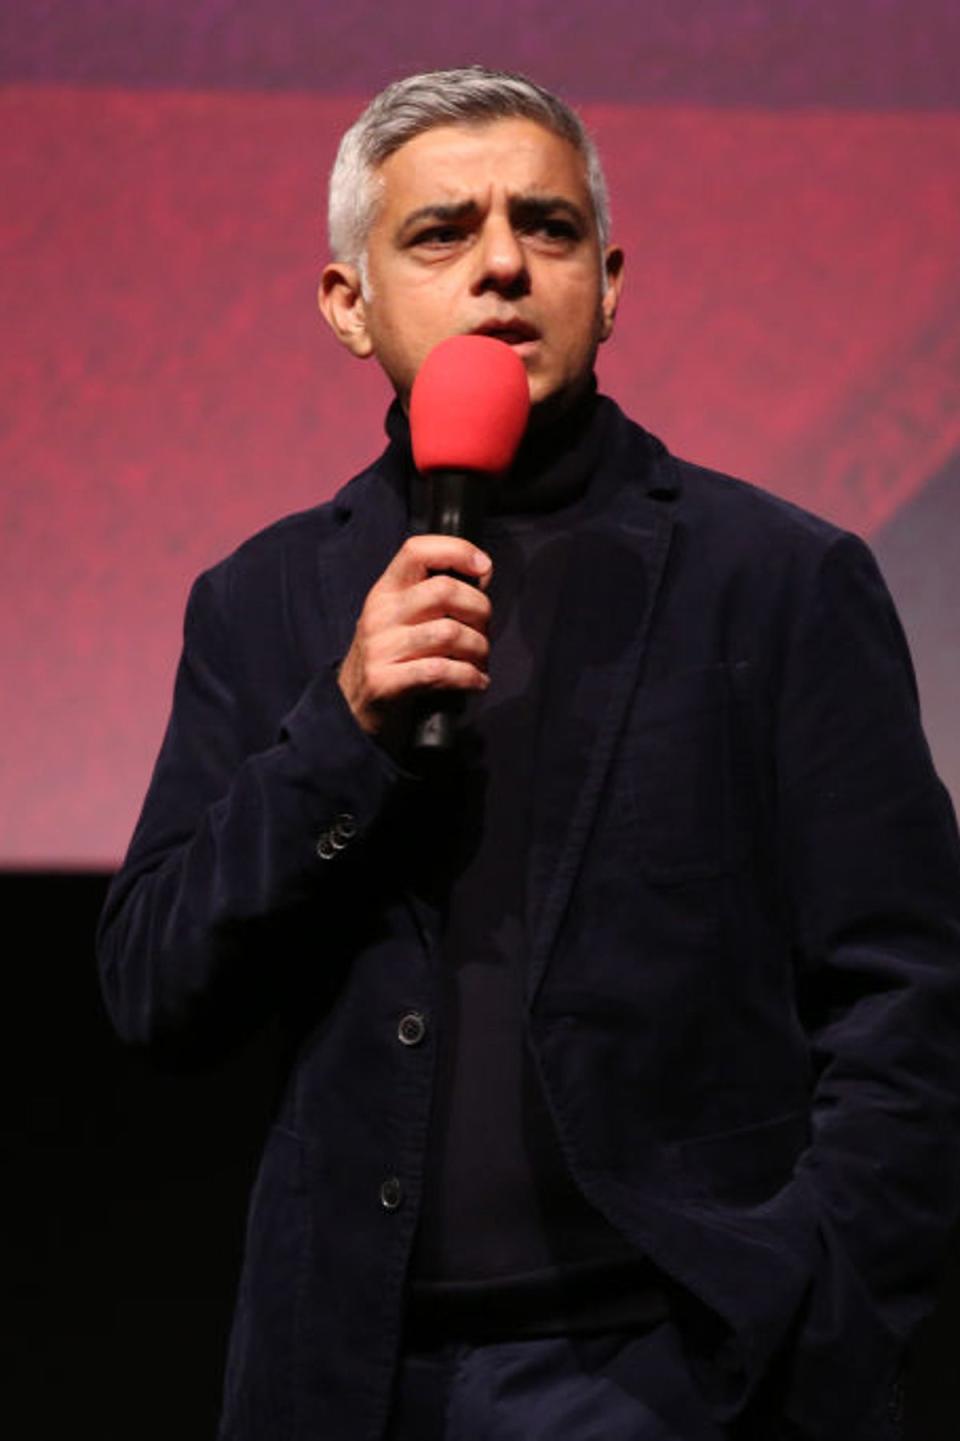 Mayor Sadiq Khan has described the situation as a ‘matter of life and death’ (Getty Images for BFI)